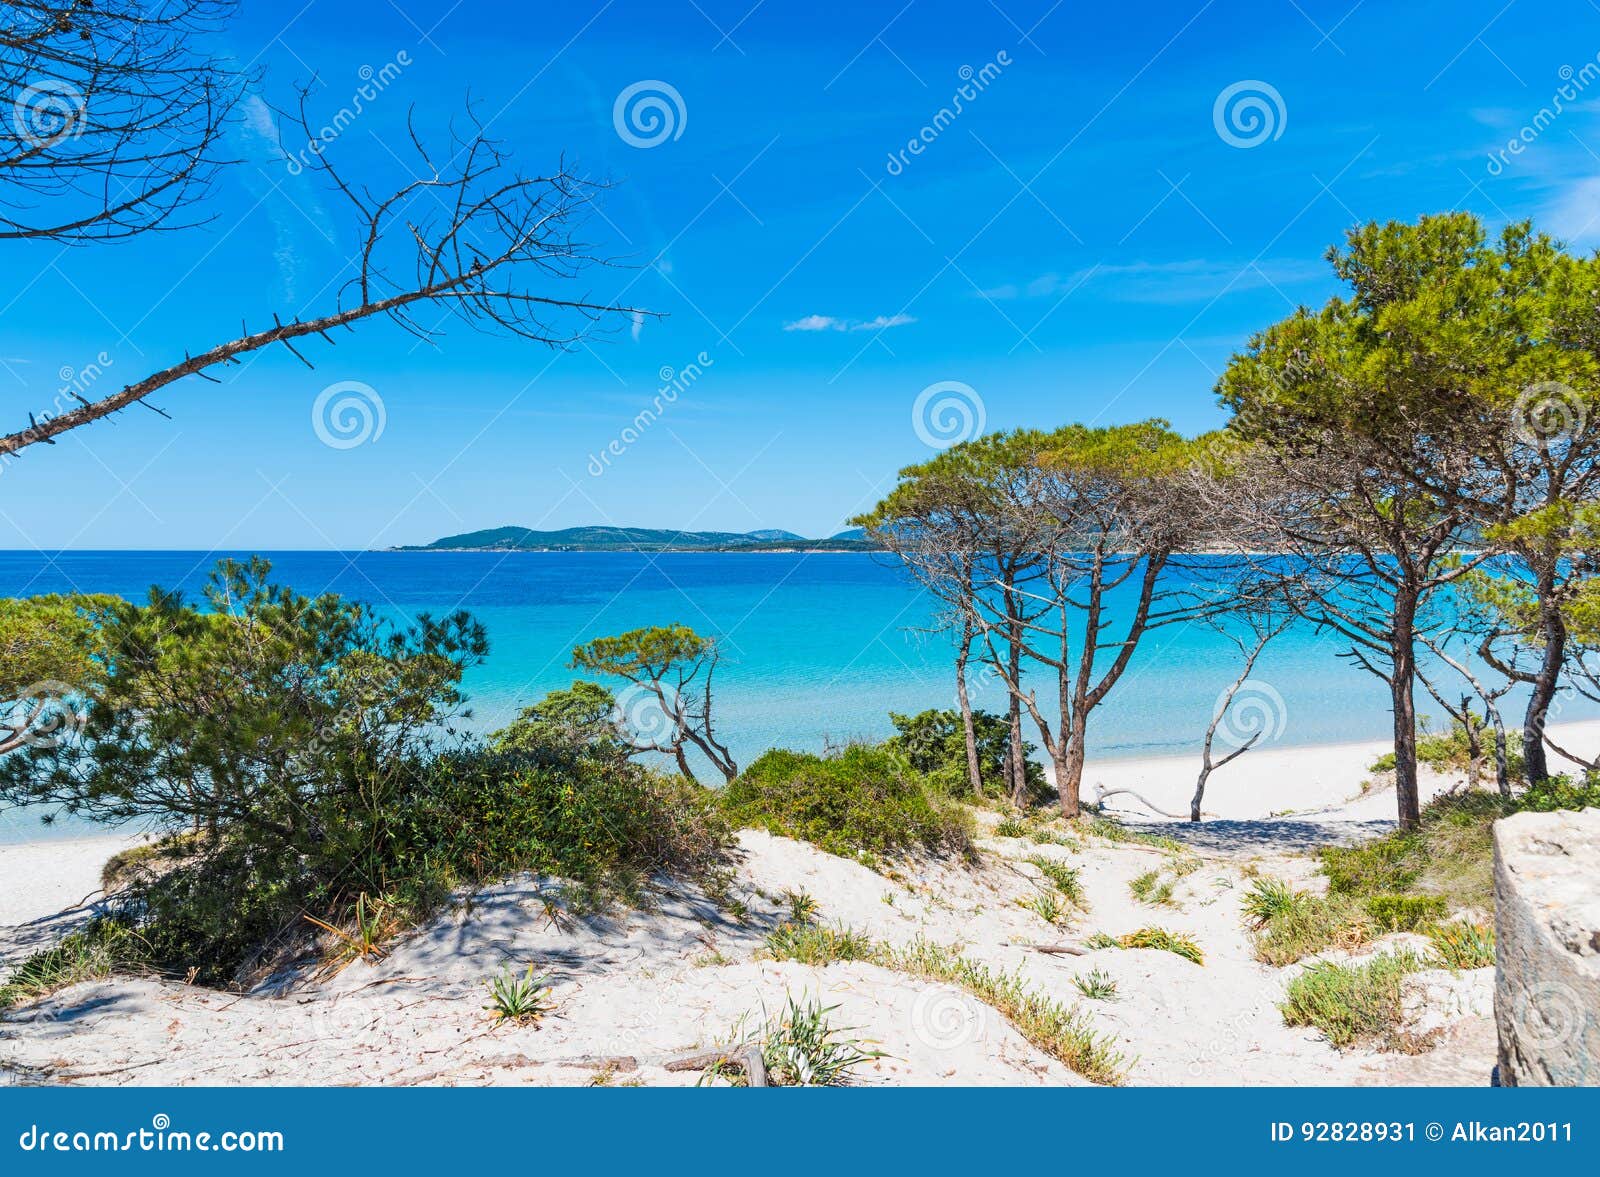 sand dunes and pine trees in maria pia beach